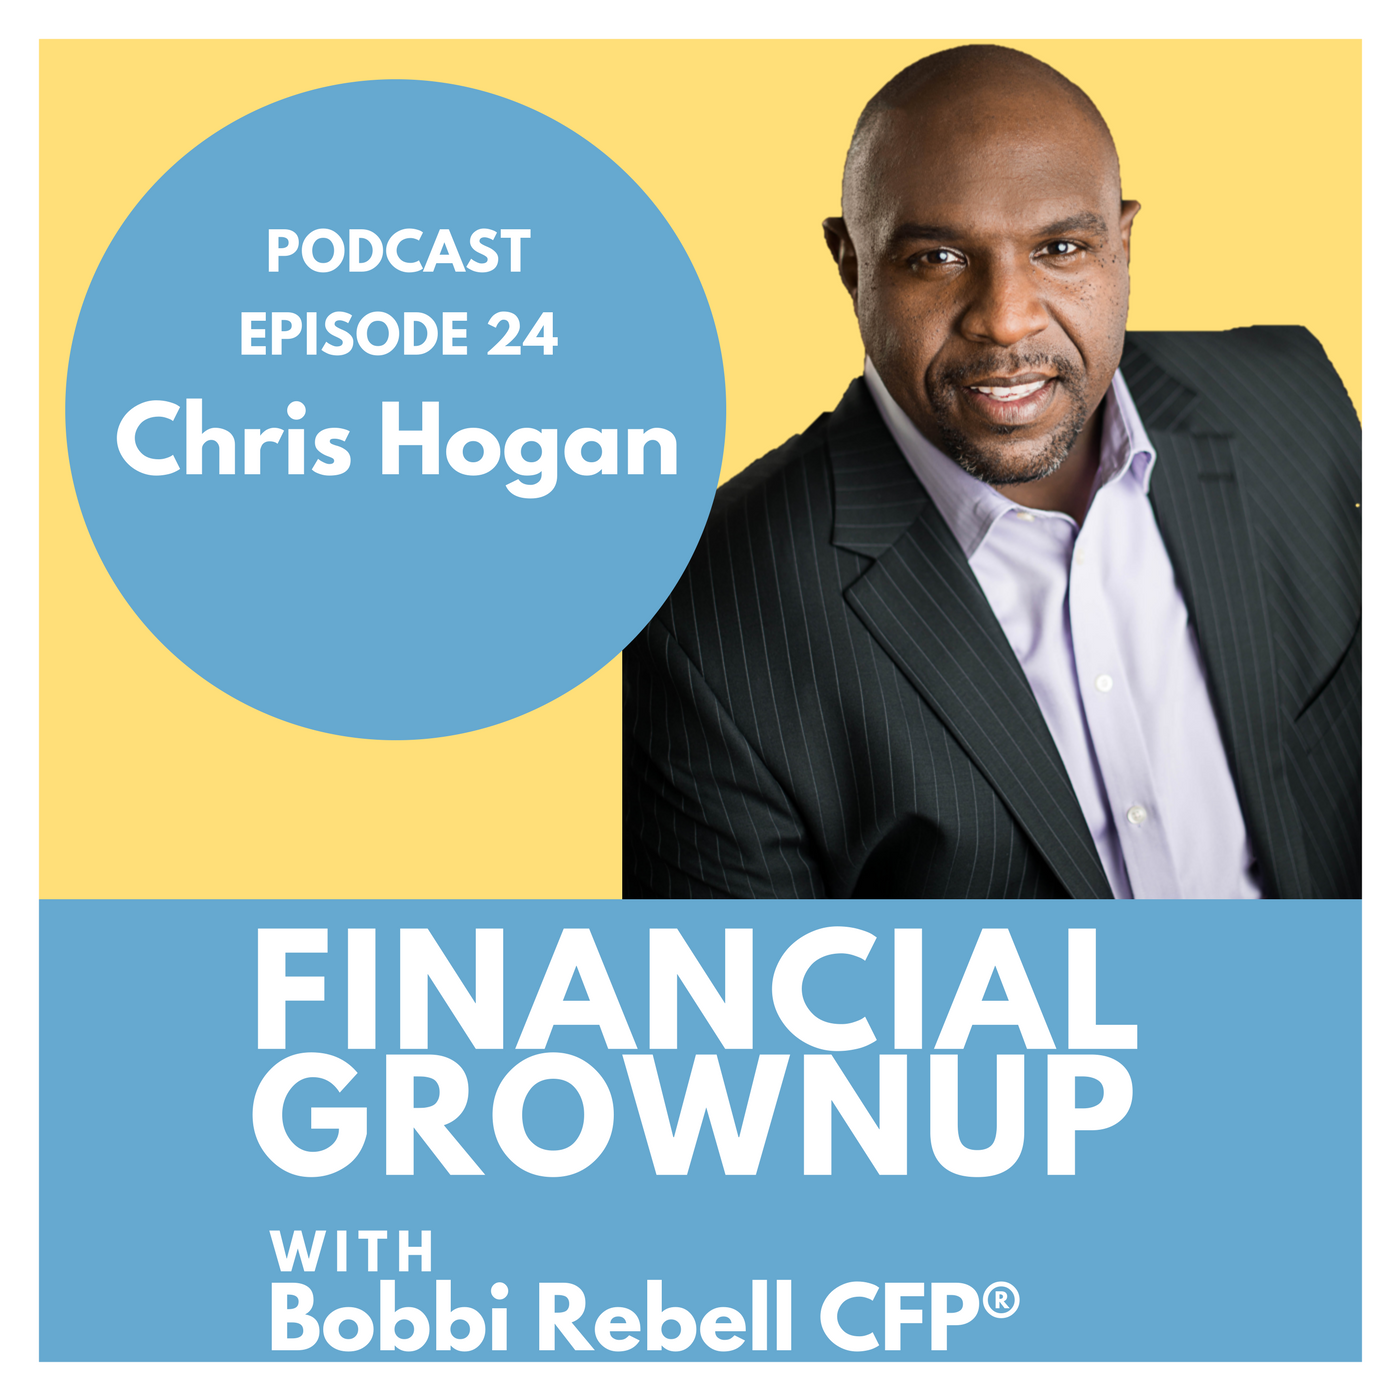 Chris Hogan chops the fat at the grocery store- and cashes in Bobbi Rebell Financial Grownup Gear Bobbi Rebell